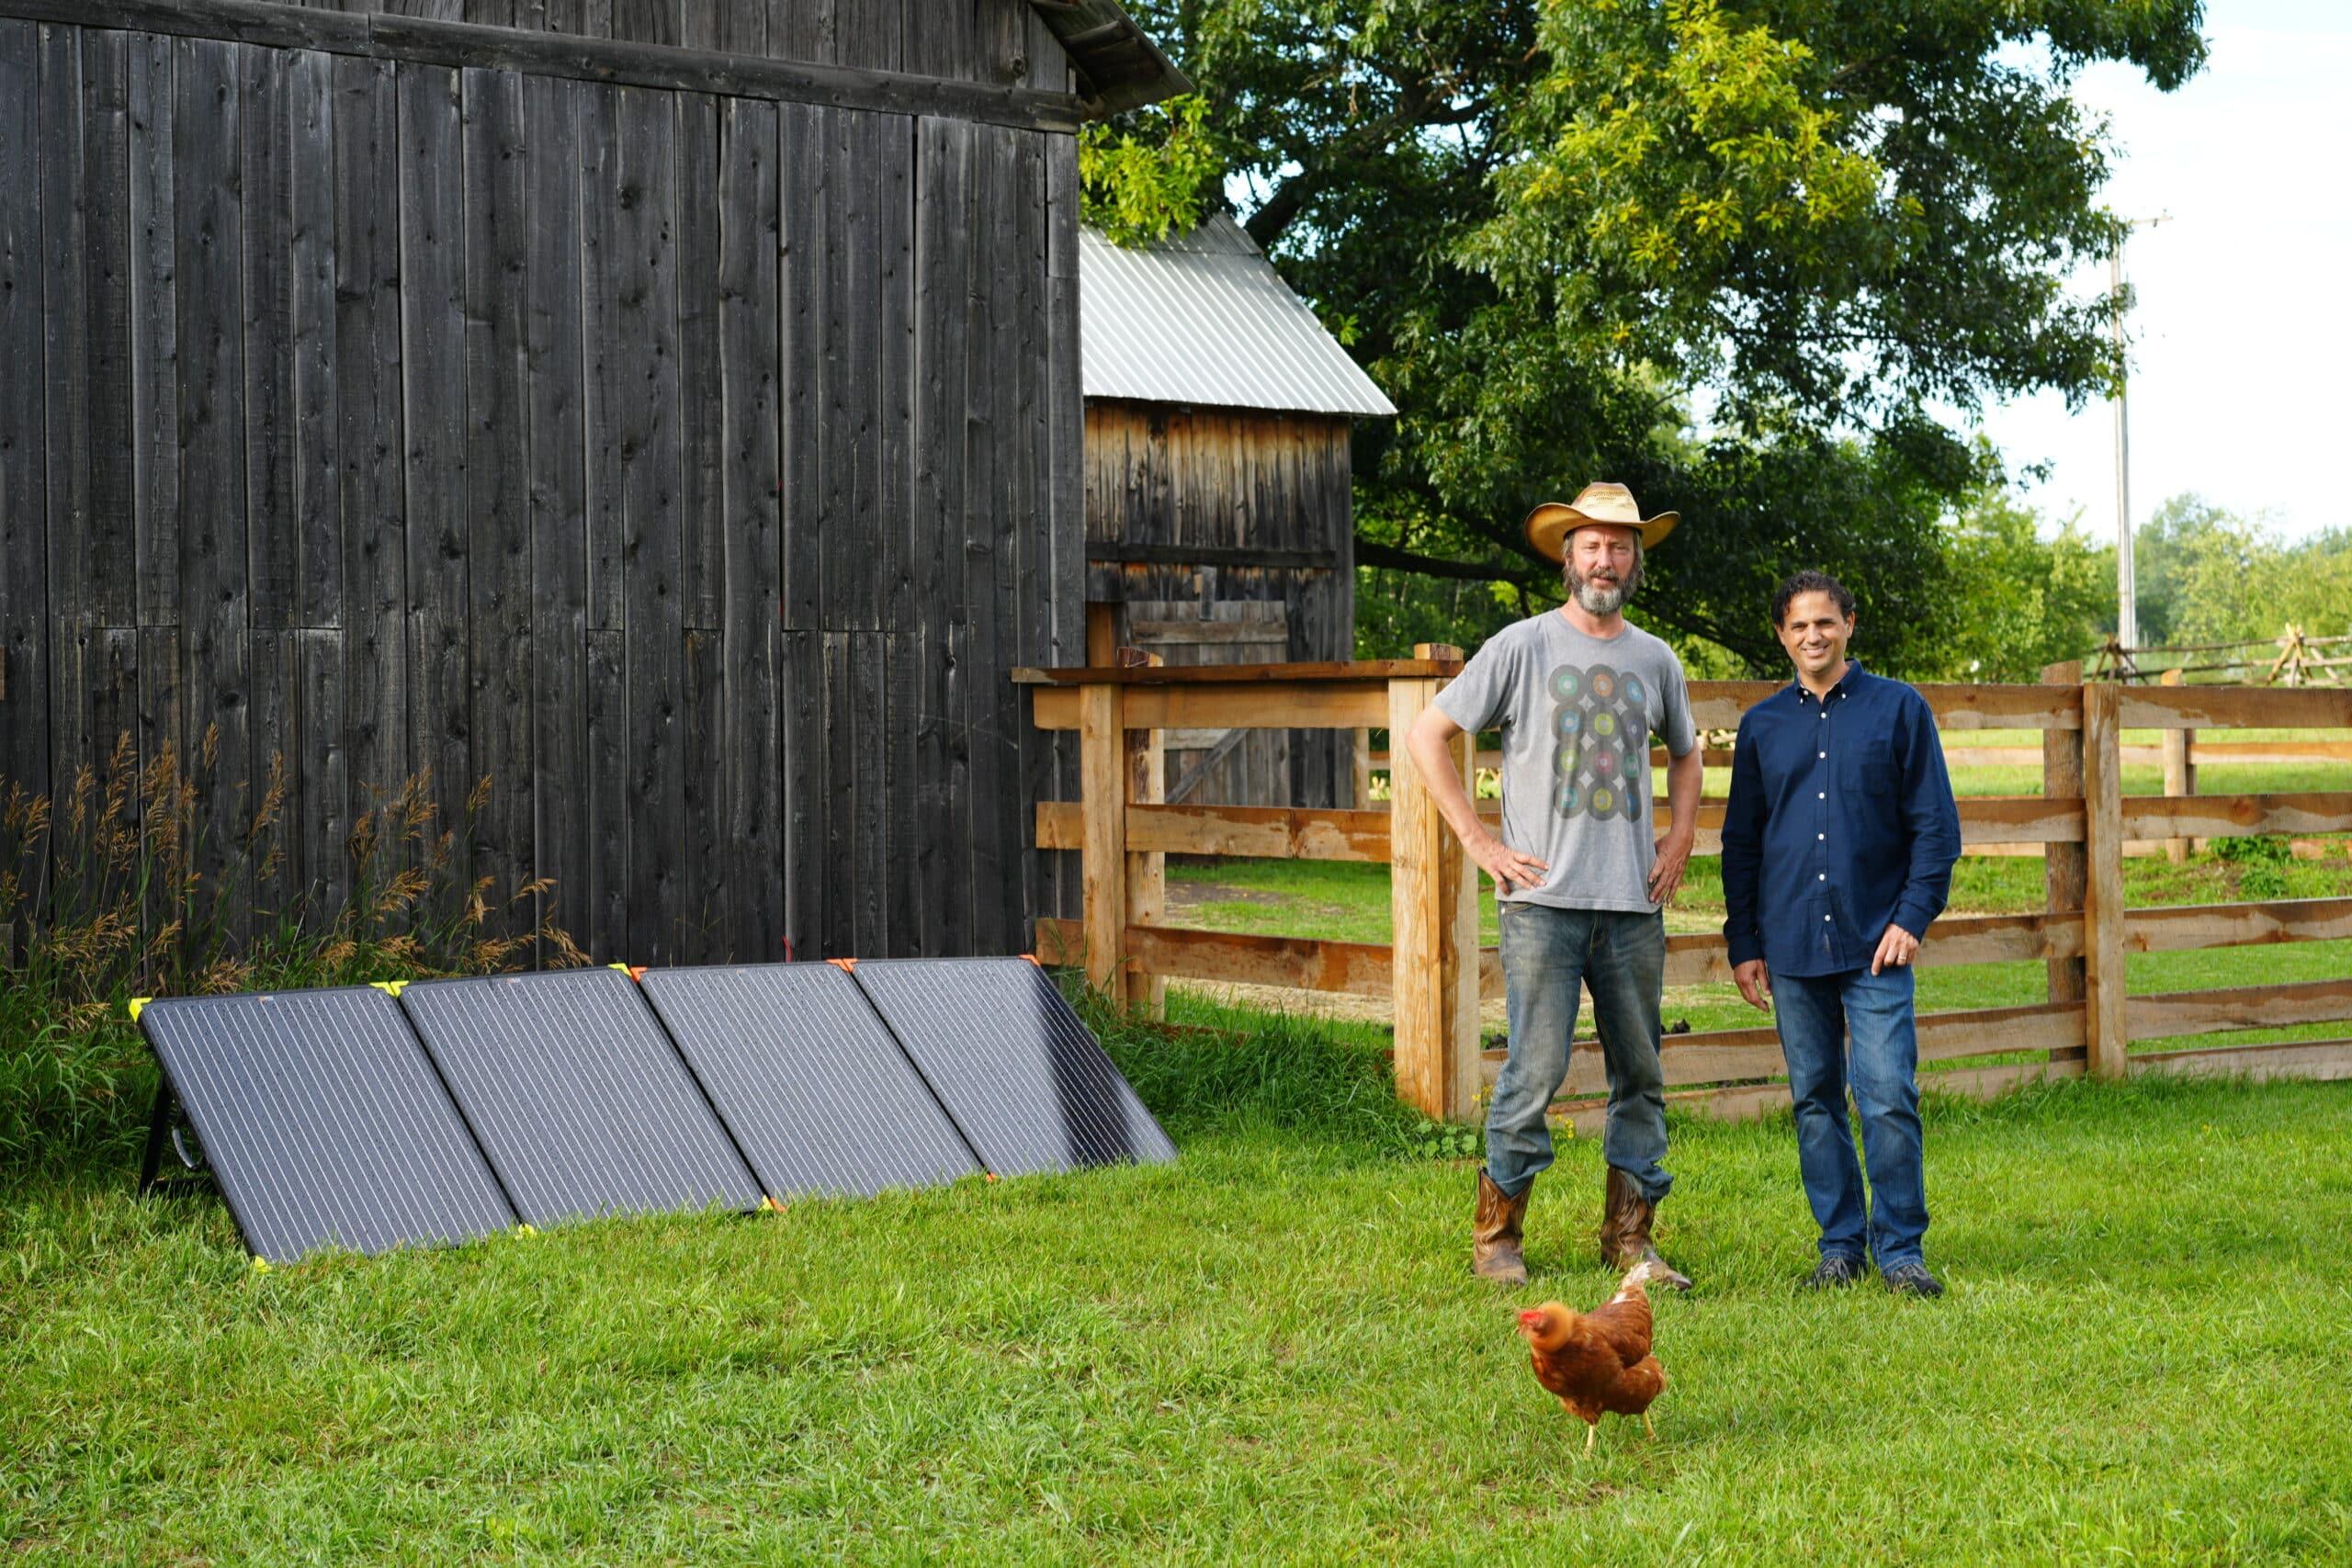 Tom Green and Denis Phares standing next to solar panels and a chicken